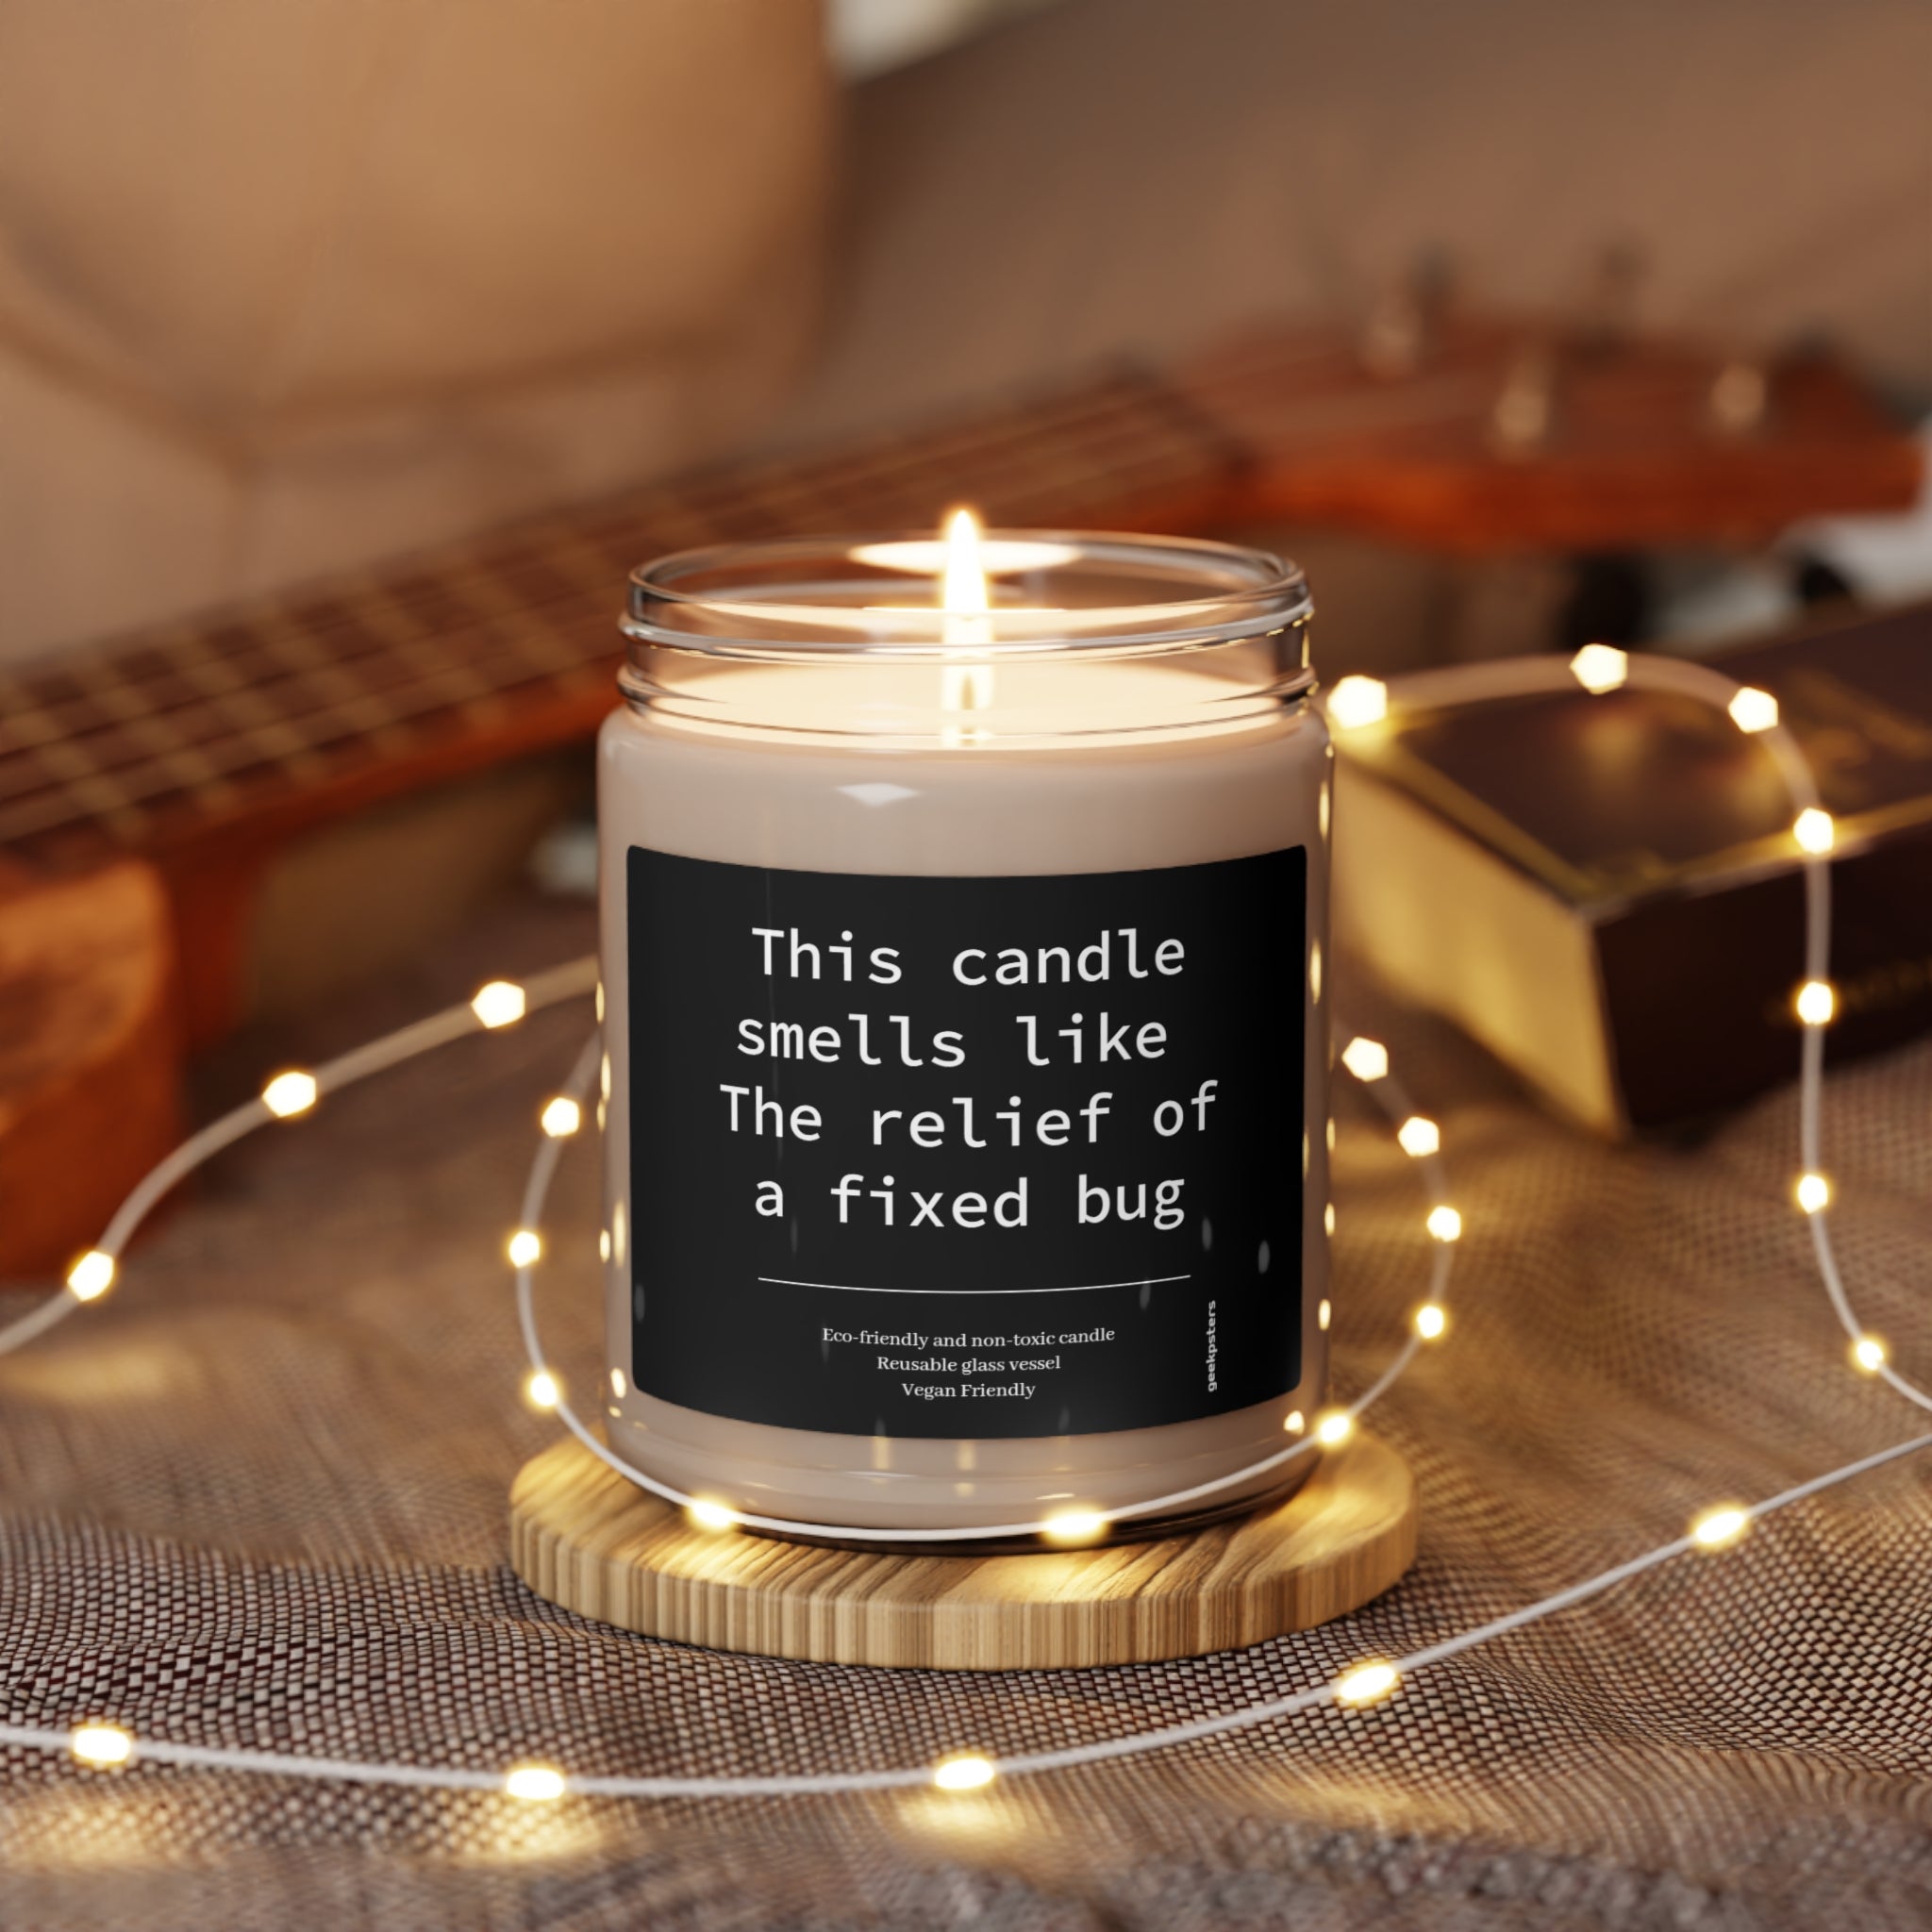 A This Candle Smells Like The Relief of a Fixed Bug scented soy candle with a label reading "this candle smells like the relief of a fixed bug," placed on a wooden coaster, surrounded by fairy lights.